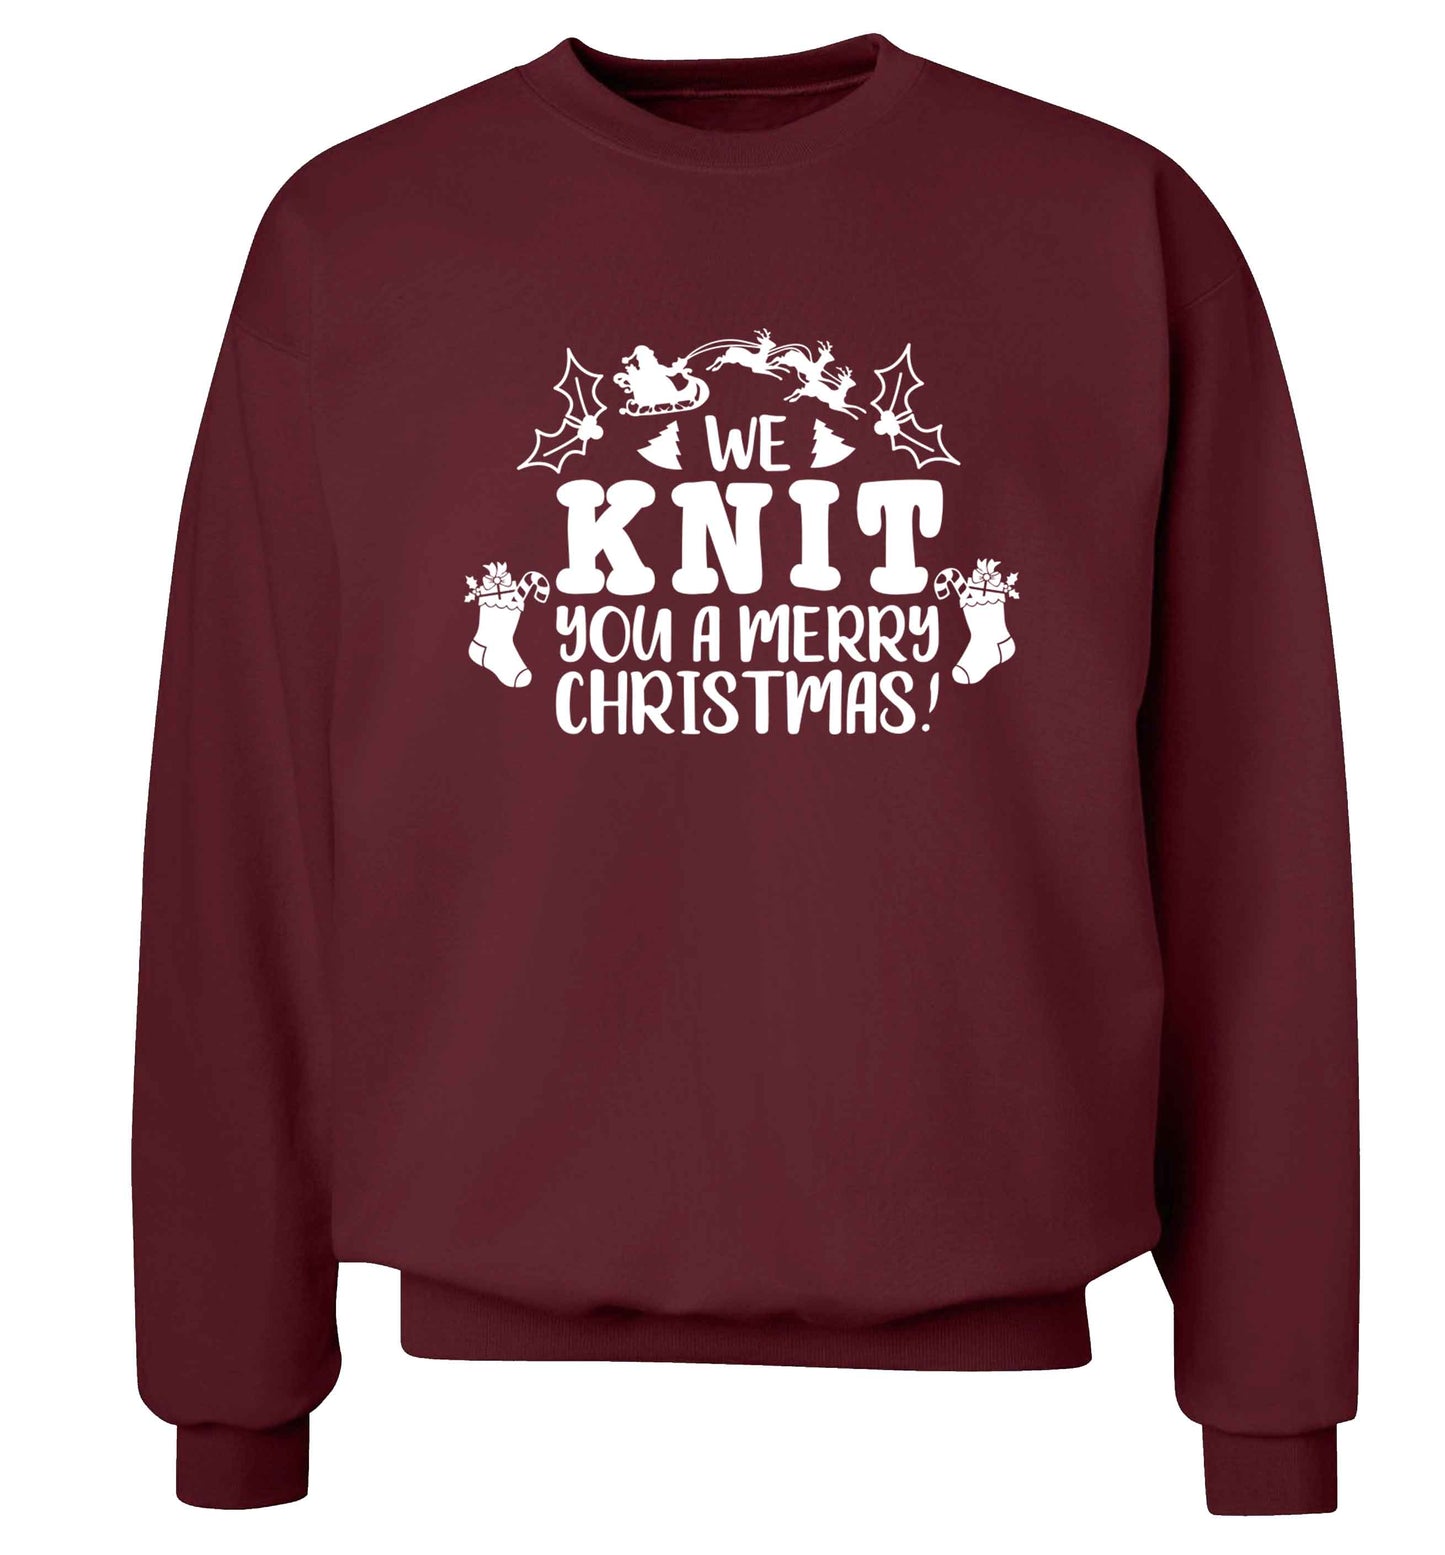 We knit you a merry Christmas Adult's unisex maroon Sweater 2XL